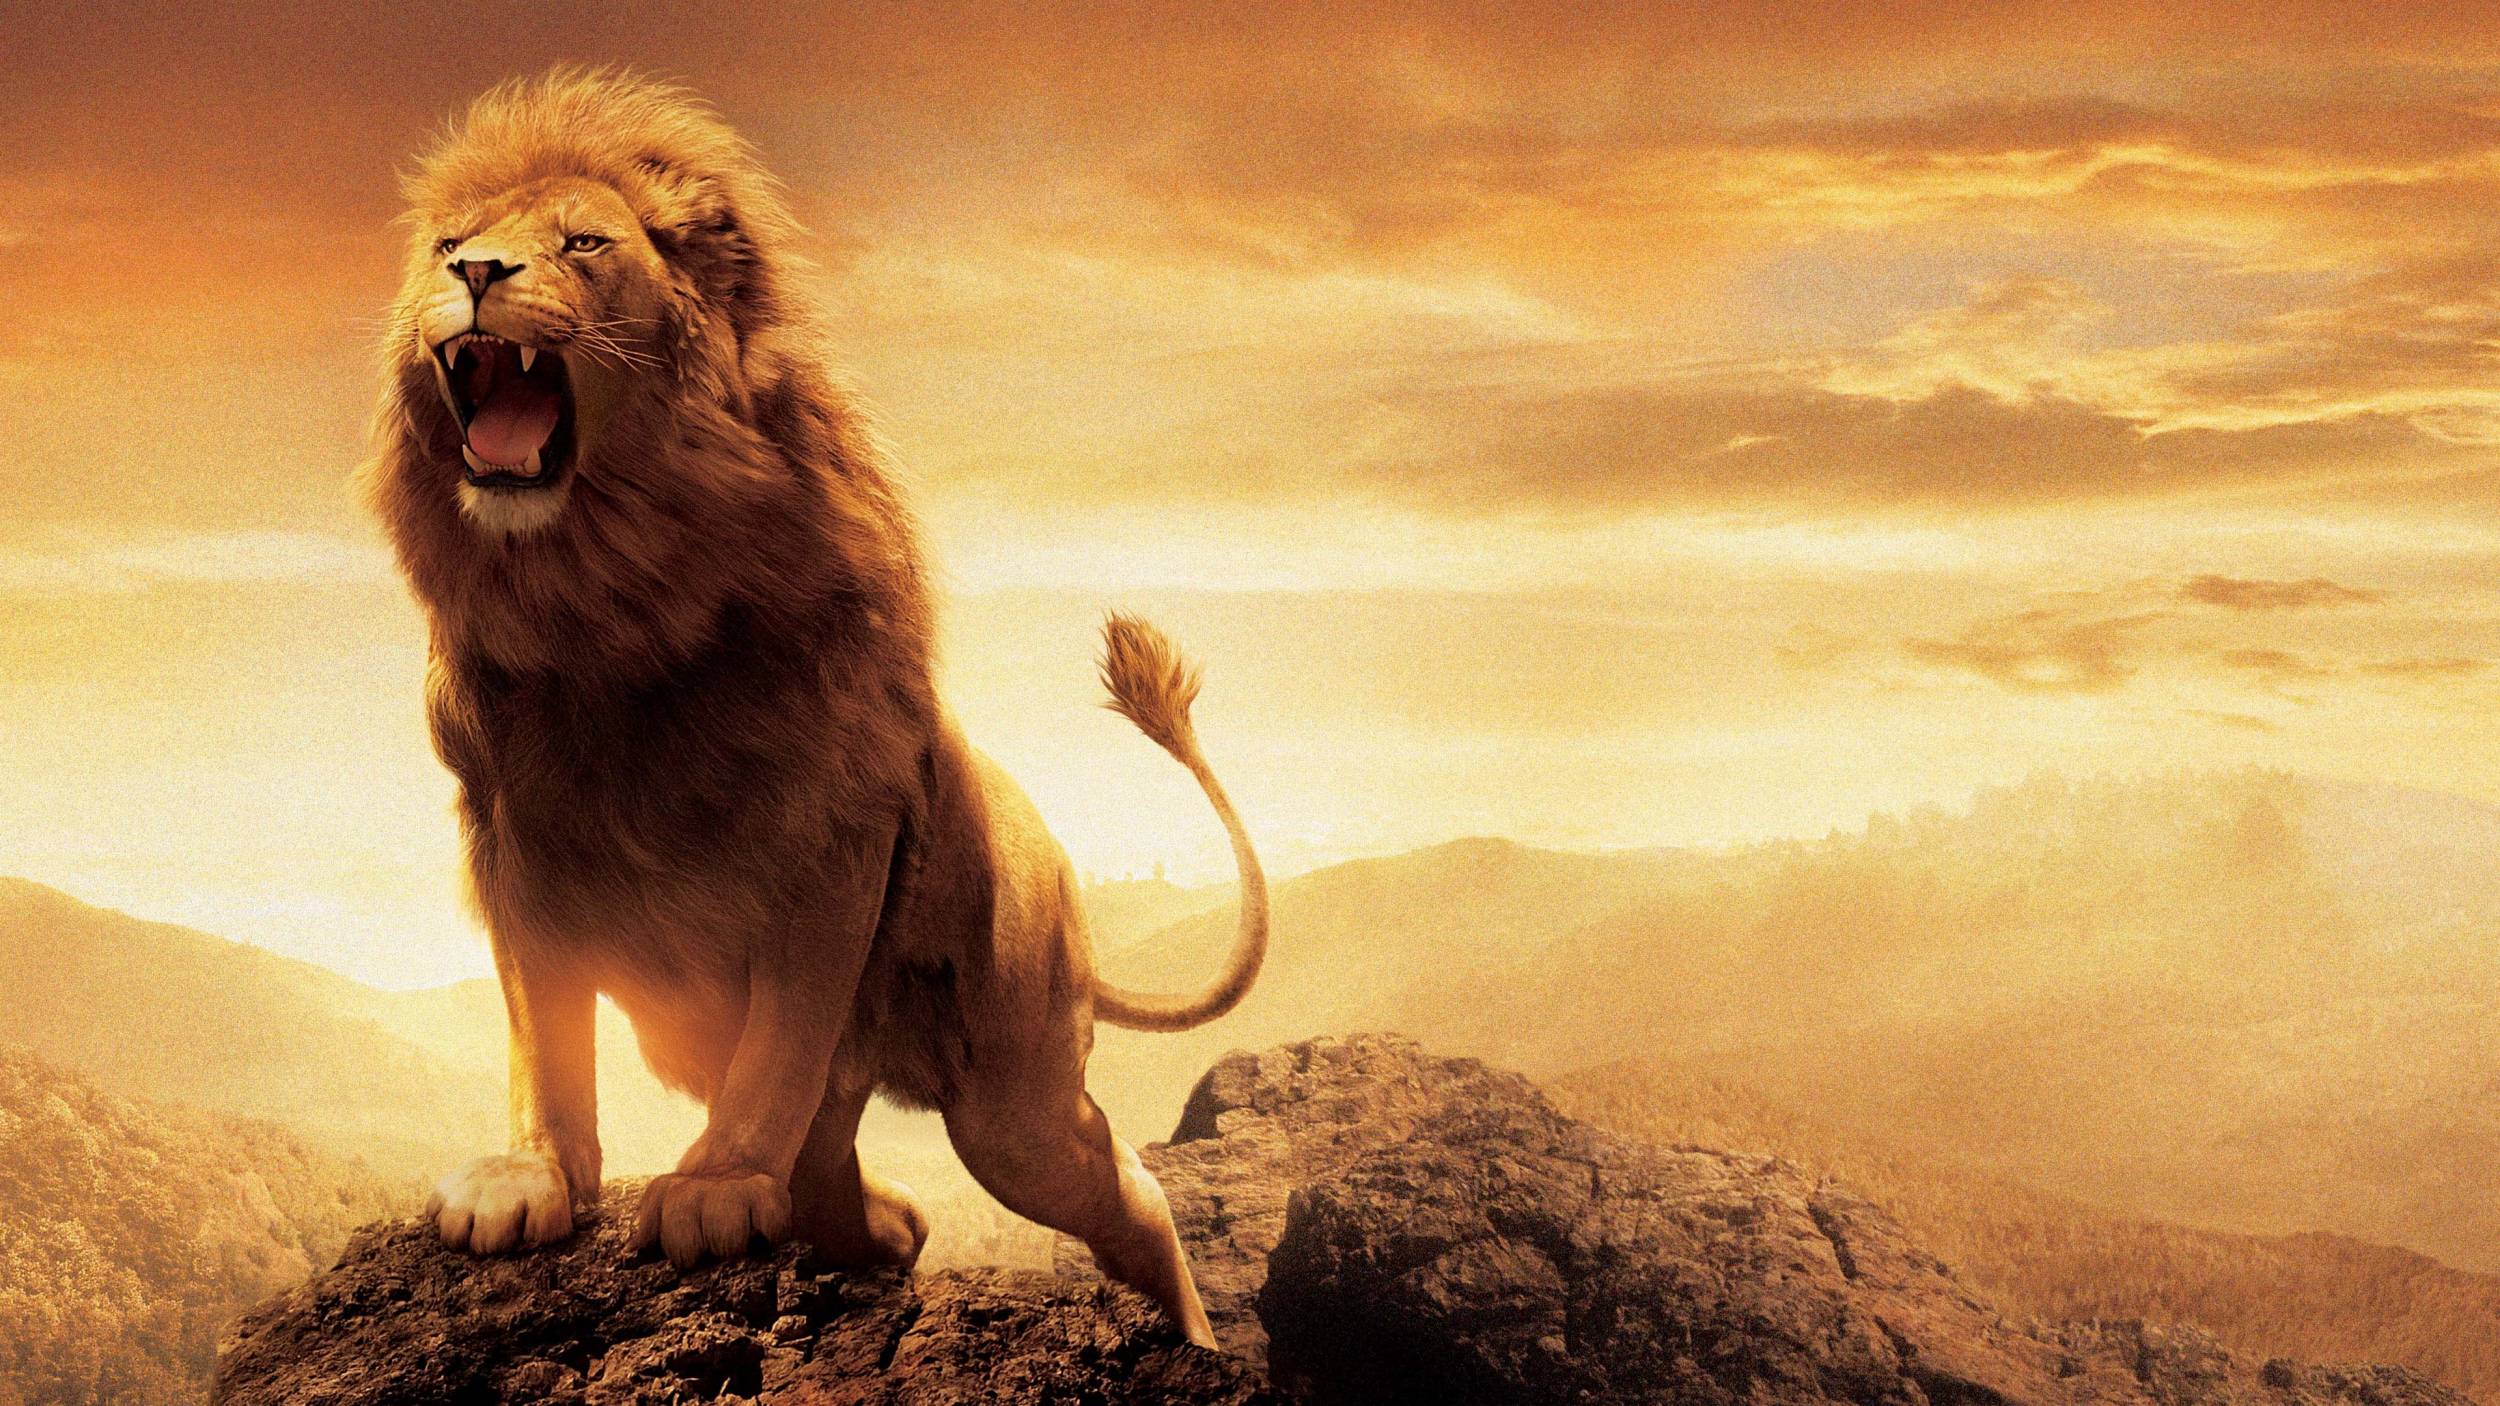 Lion HD Wallpaper For Pc Mobile On